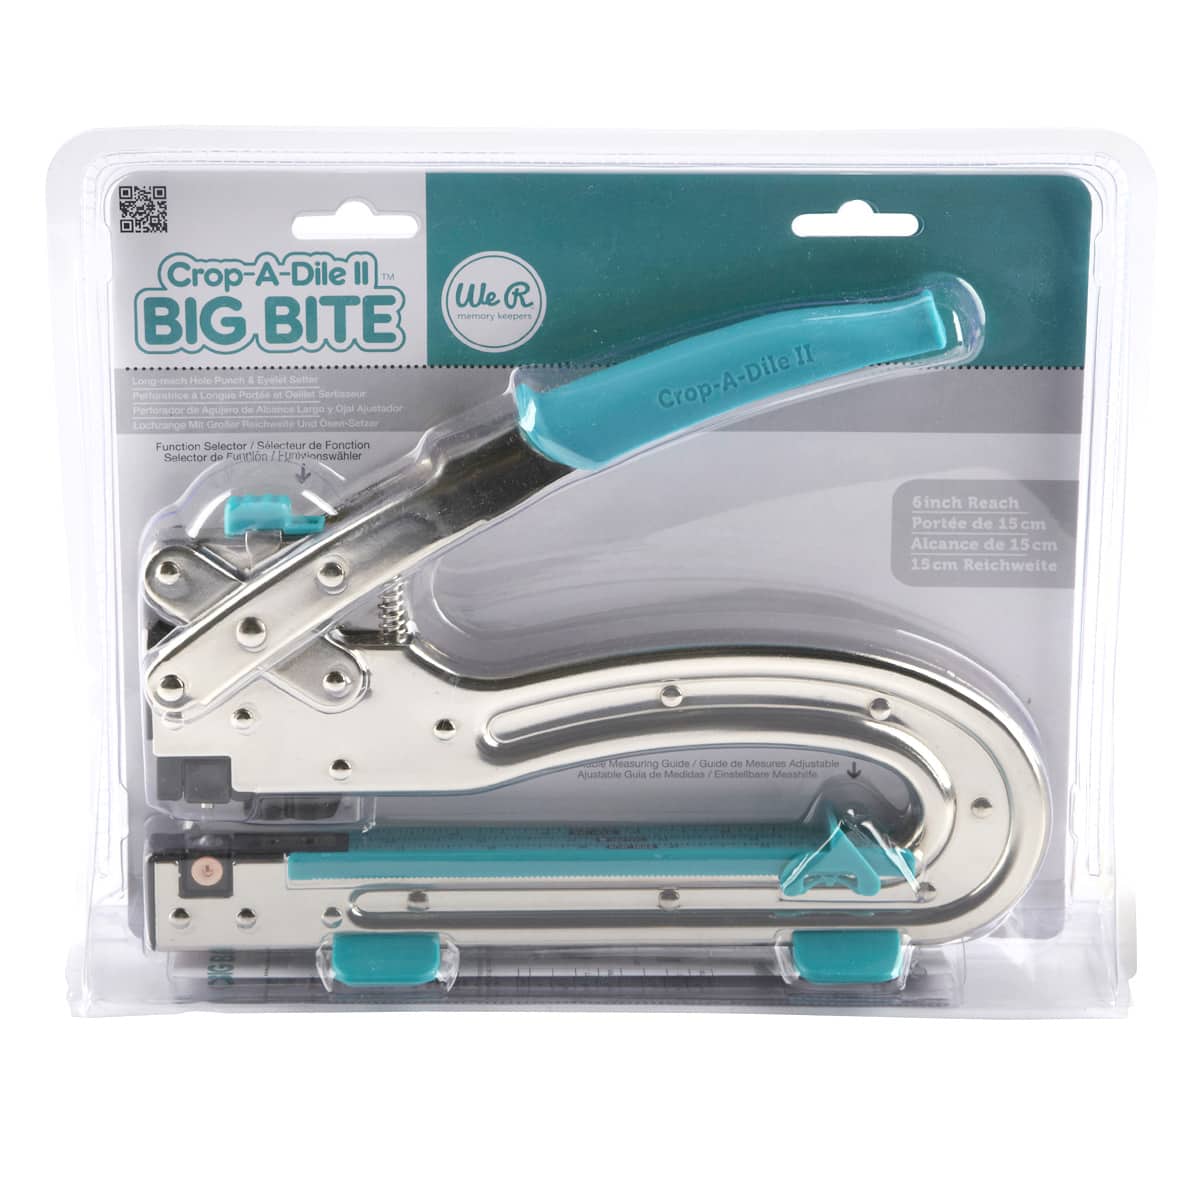 We R Memory Memory Keepers Crop-A-Dile Multi-Punch Tool